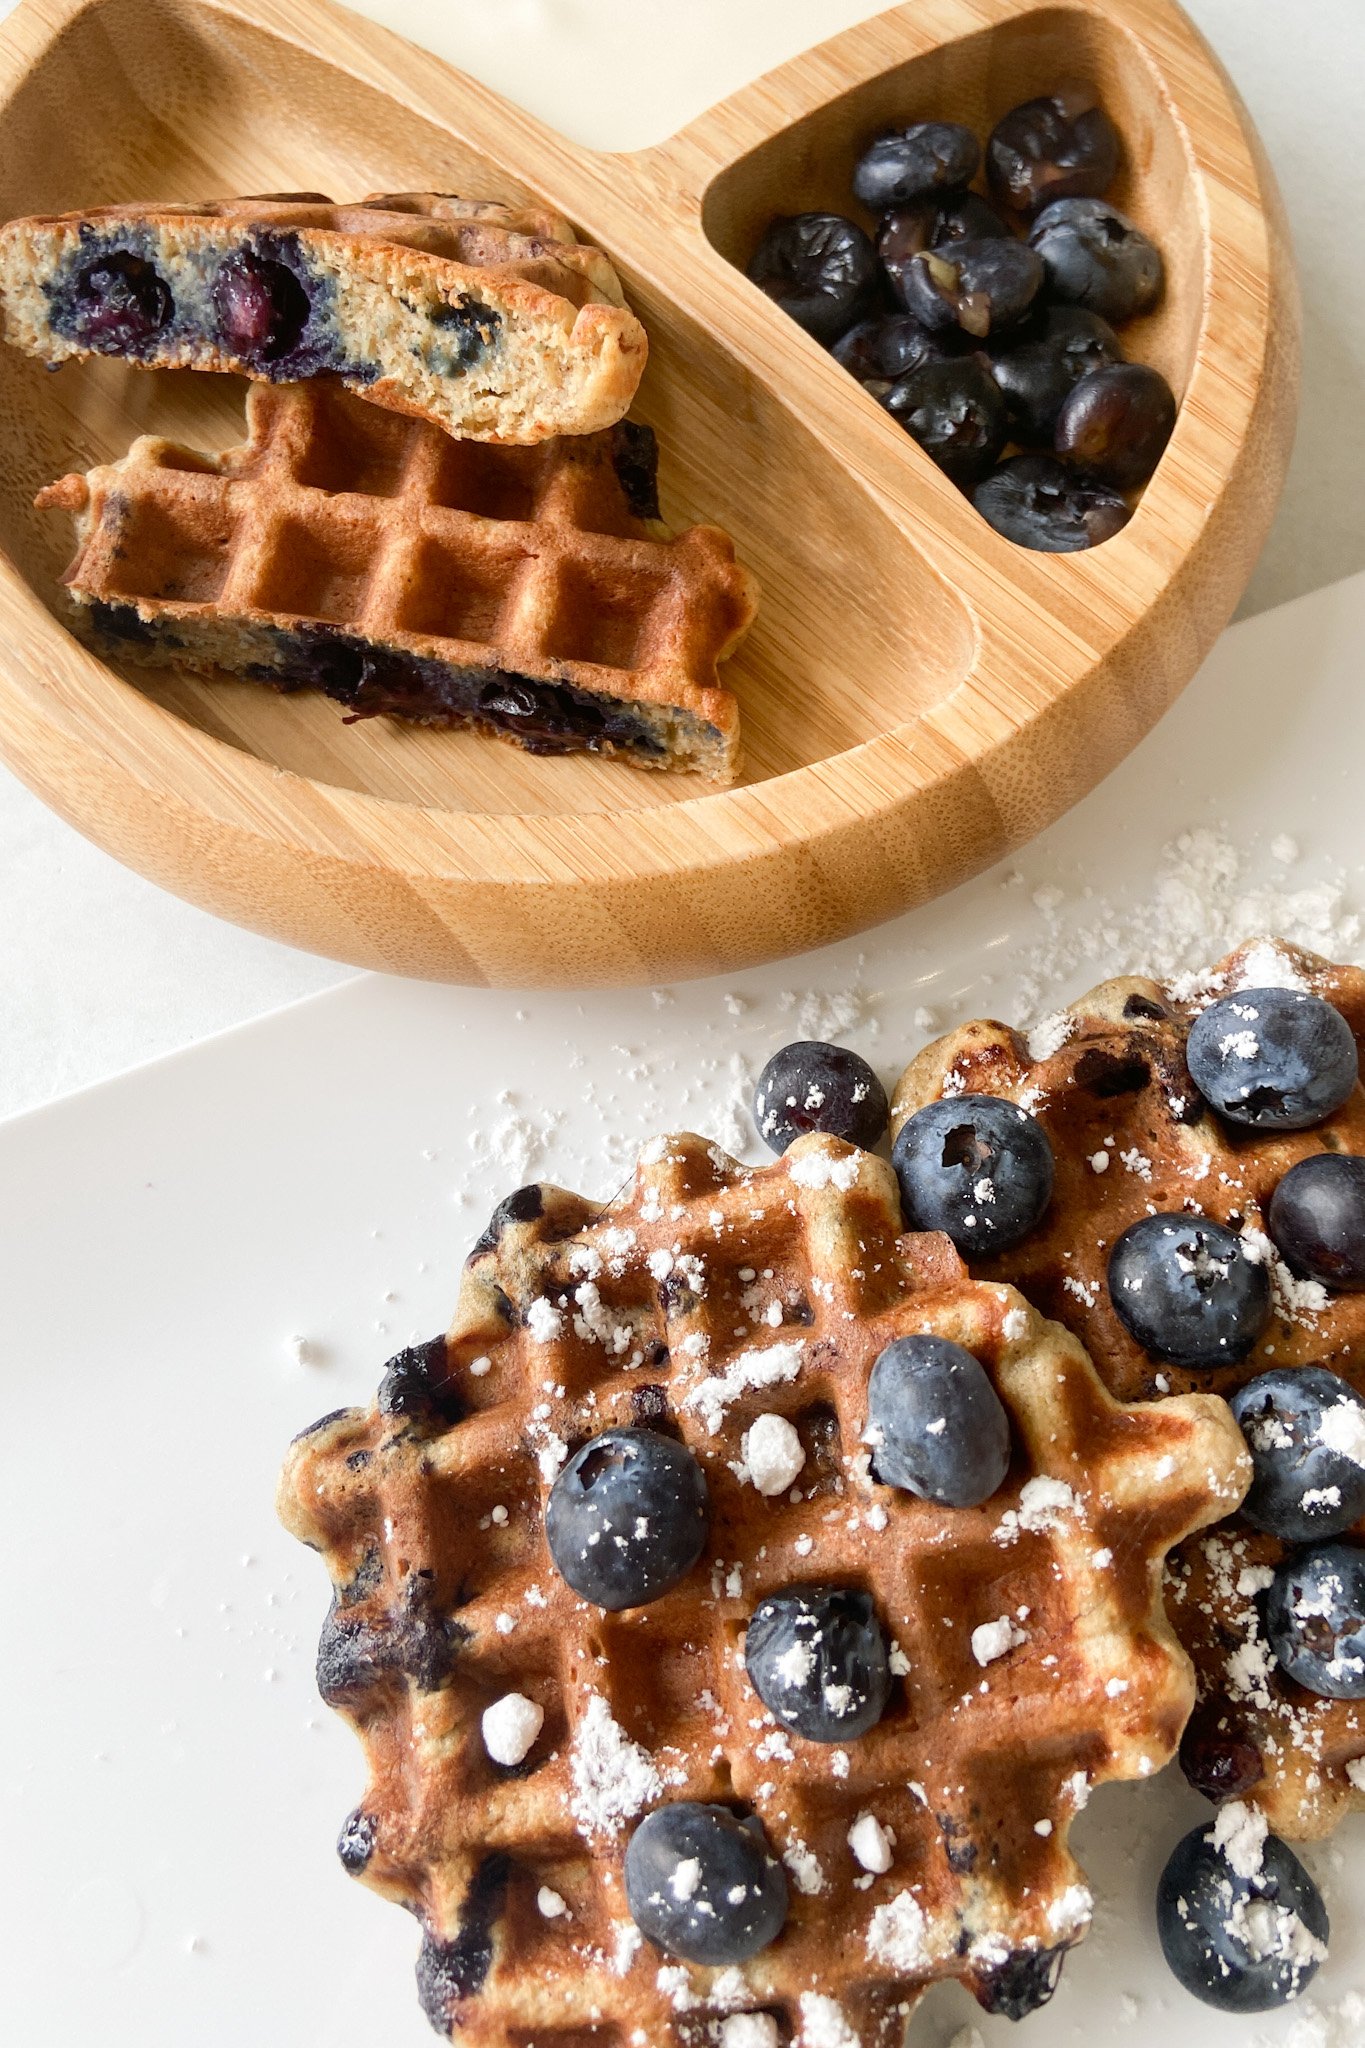 Blueberry banana waffles served with blueberries